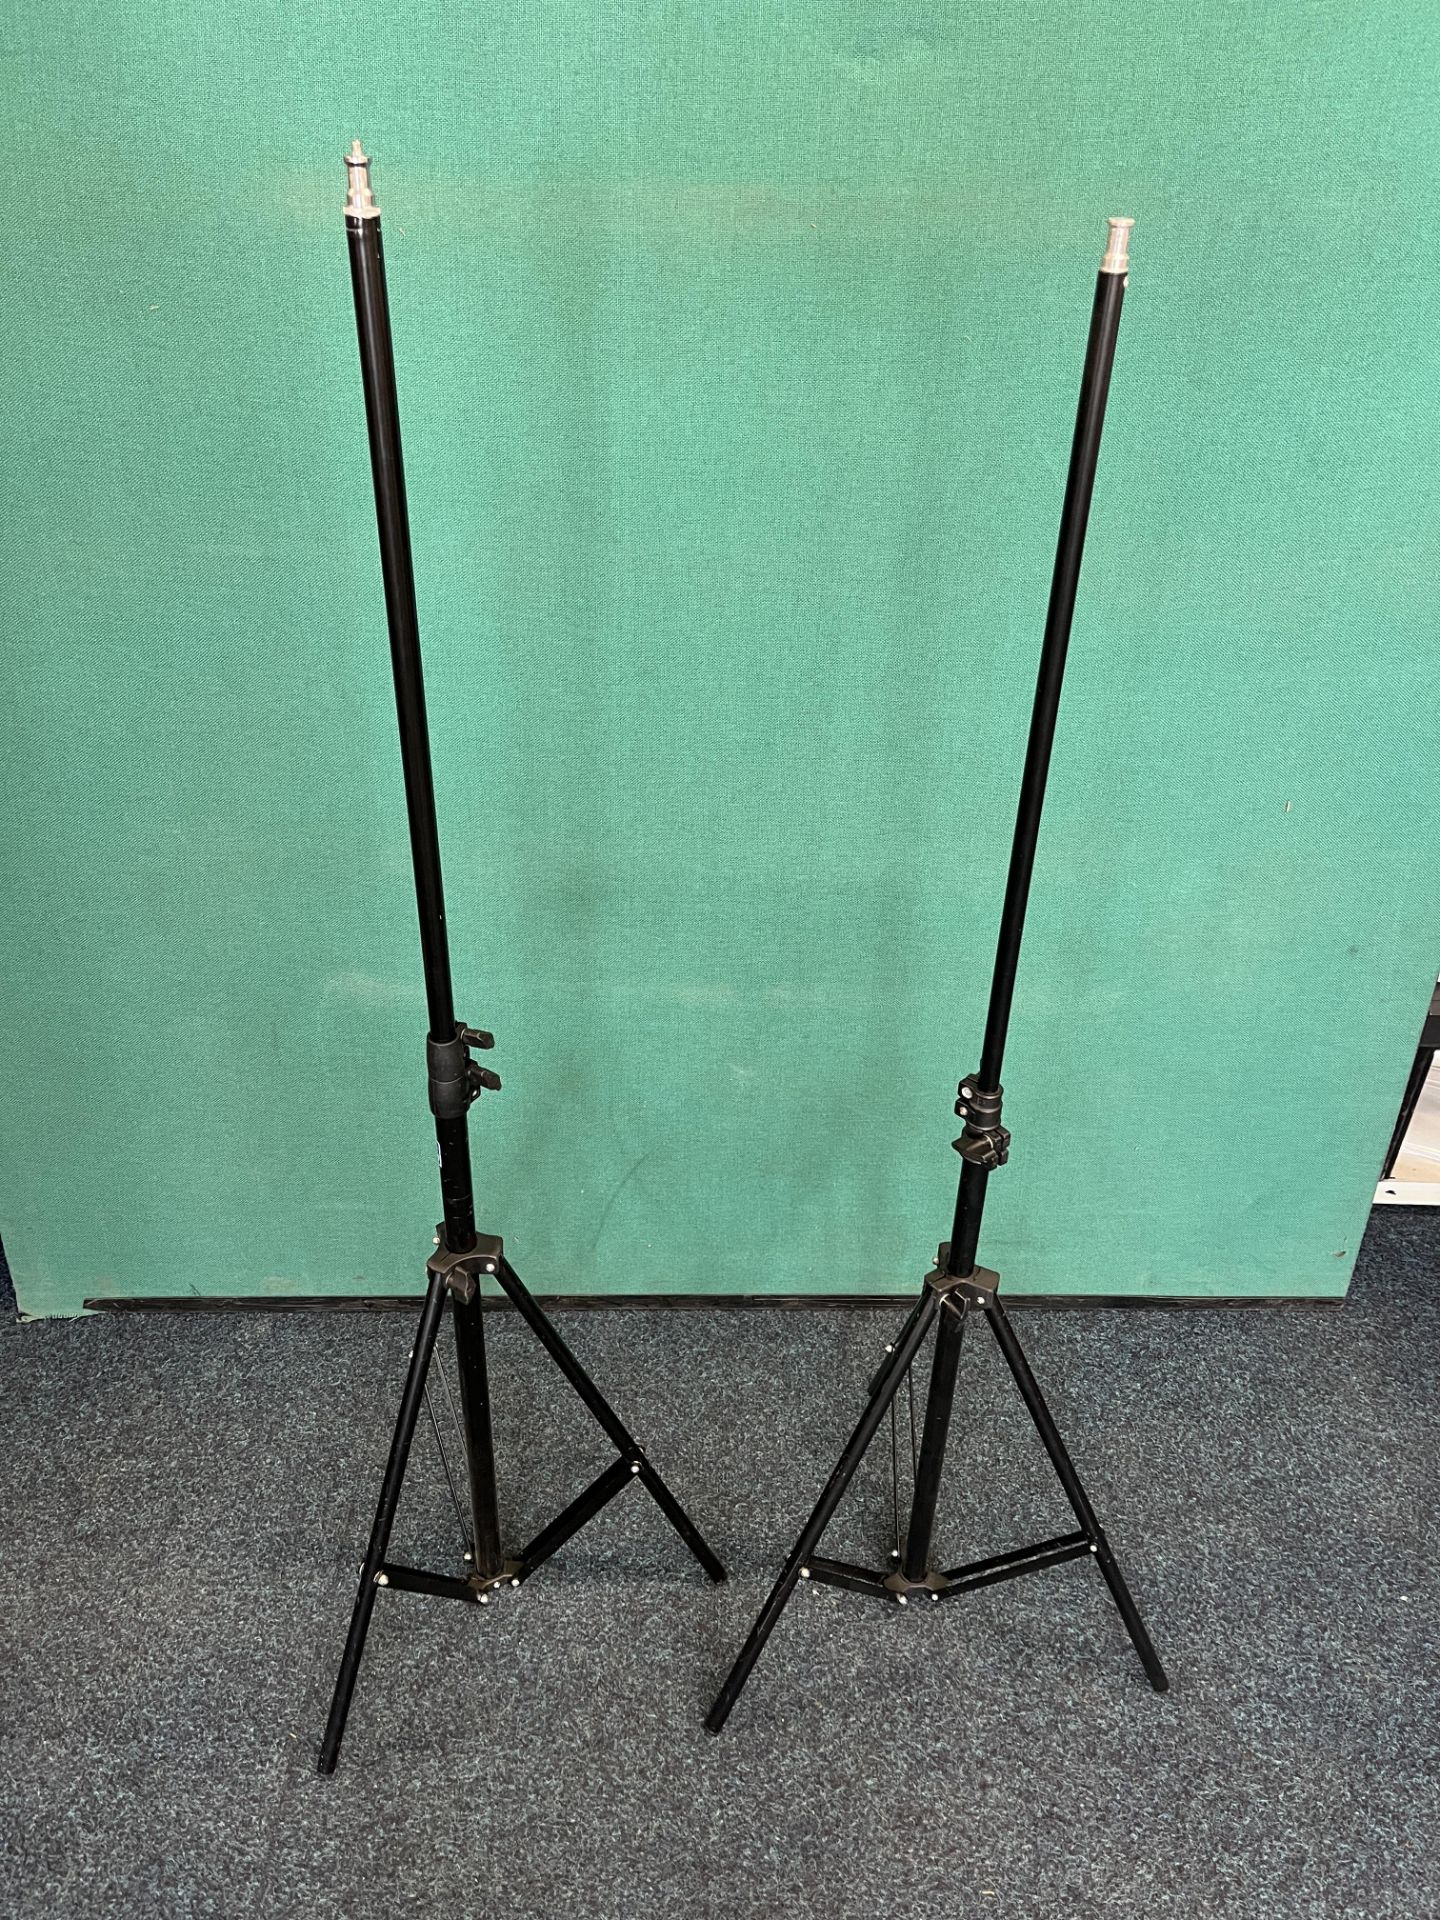 2 x Camera Tripods - As pictured - Image 2 of 6